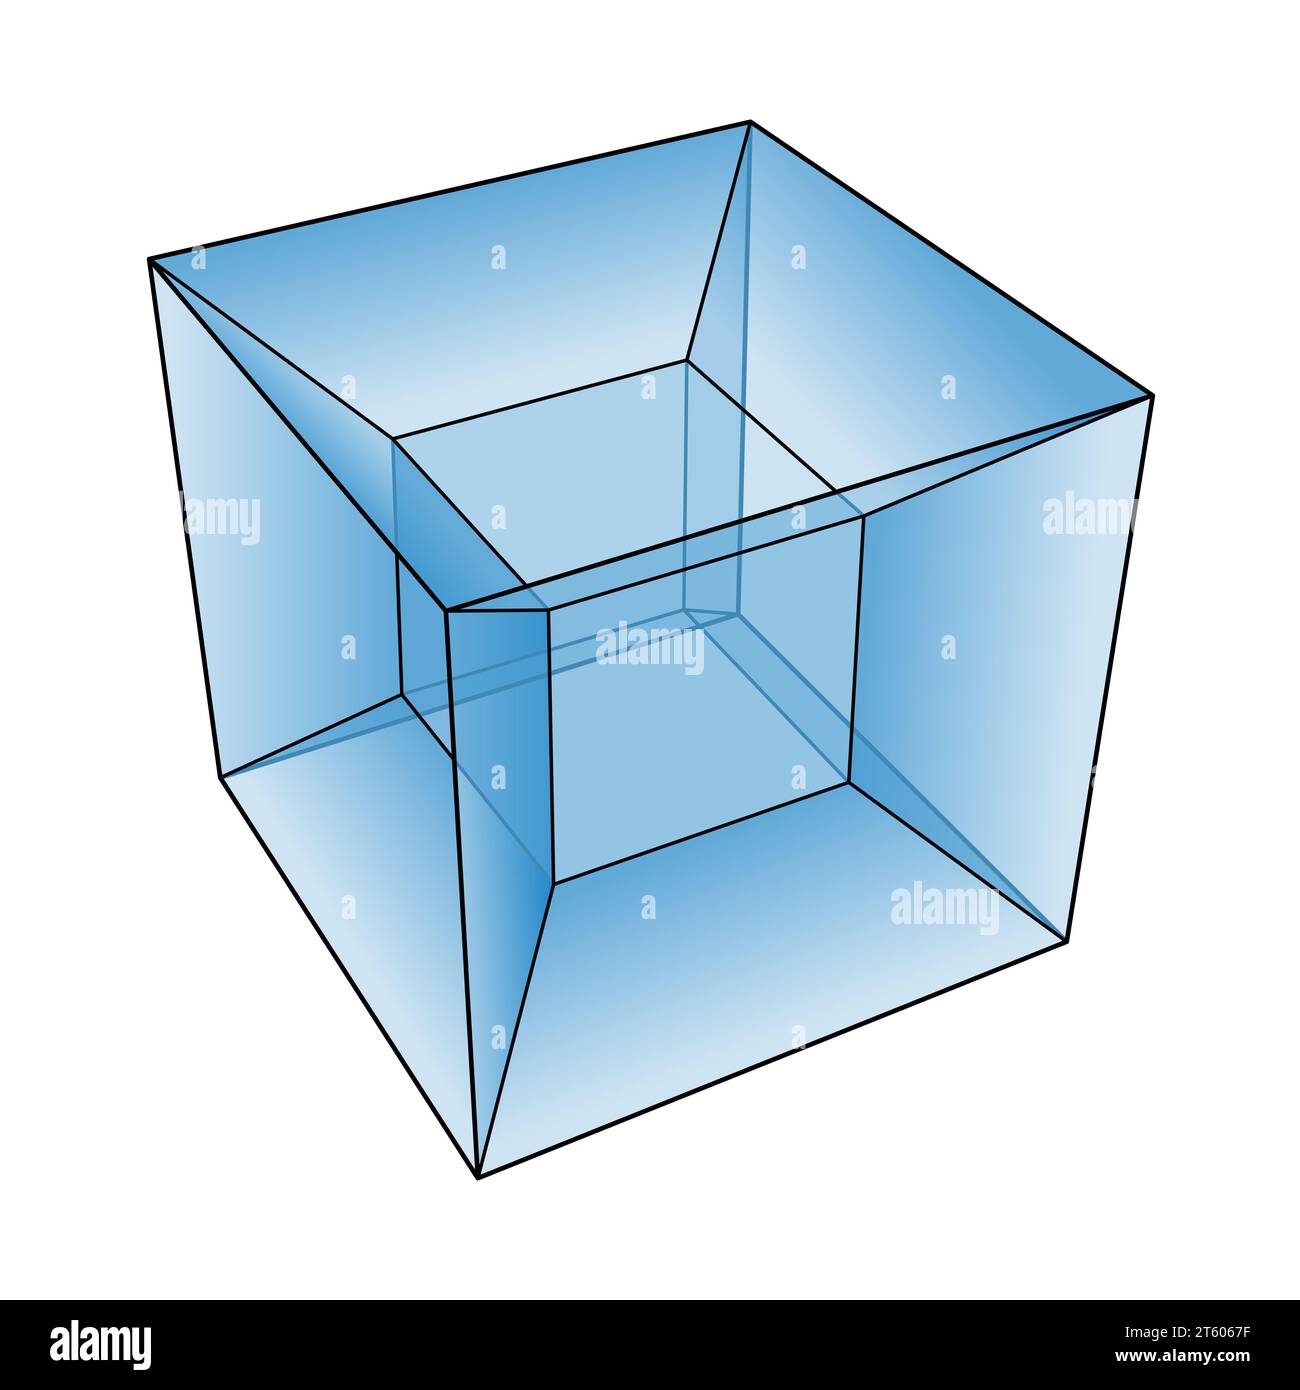 Projection of a tesseract, a four-dimensional hypercube. Also called 8-cell, C8, octachoron, octahedroid, cubic prism, and tetracube. Stock Photo